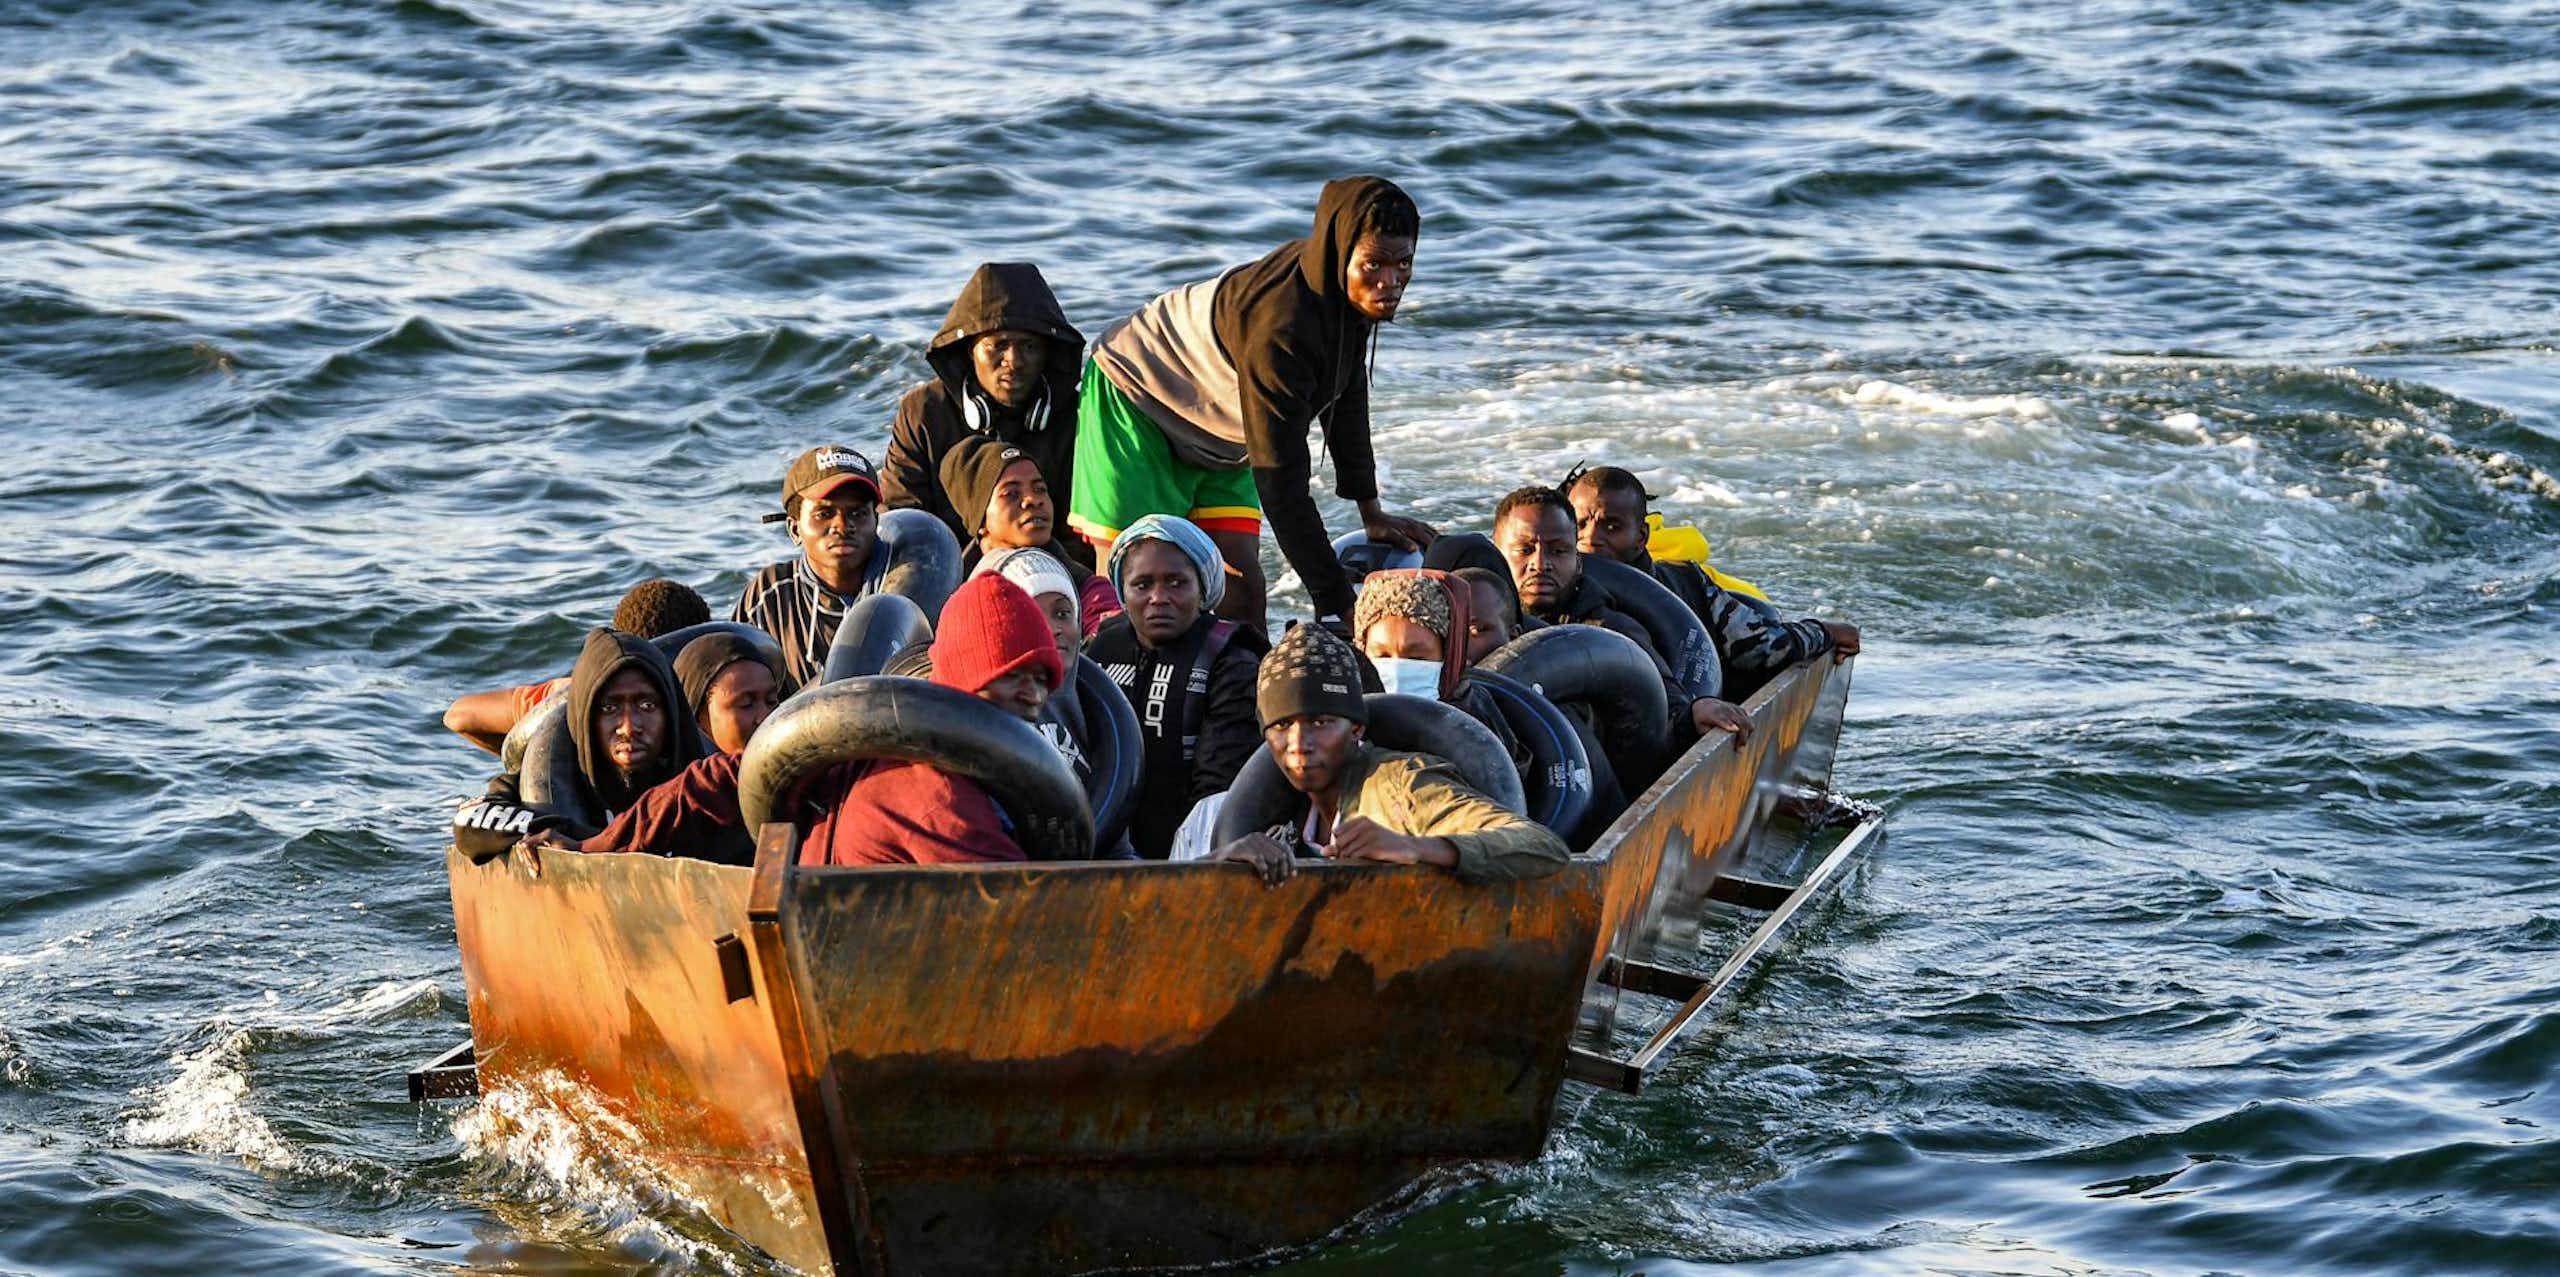 Why experts fear the EU’s new migration laws could lead to more deaths at sea